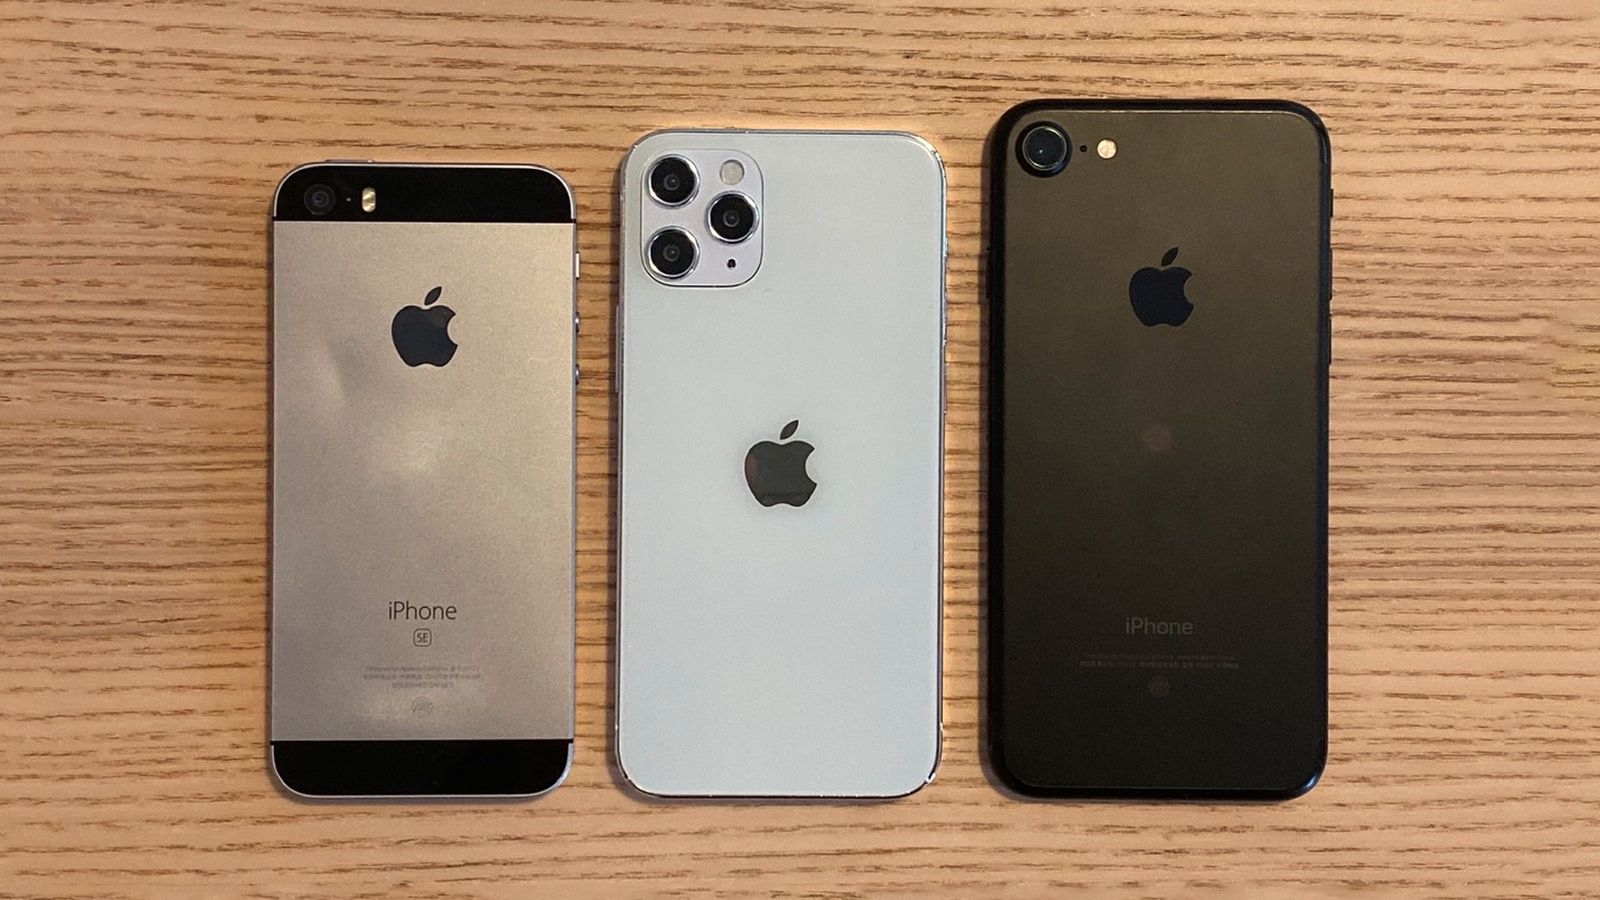 iphone-12-dummy-images-leaked-online-showing-iphone-4-like-design